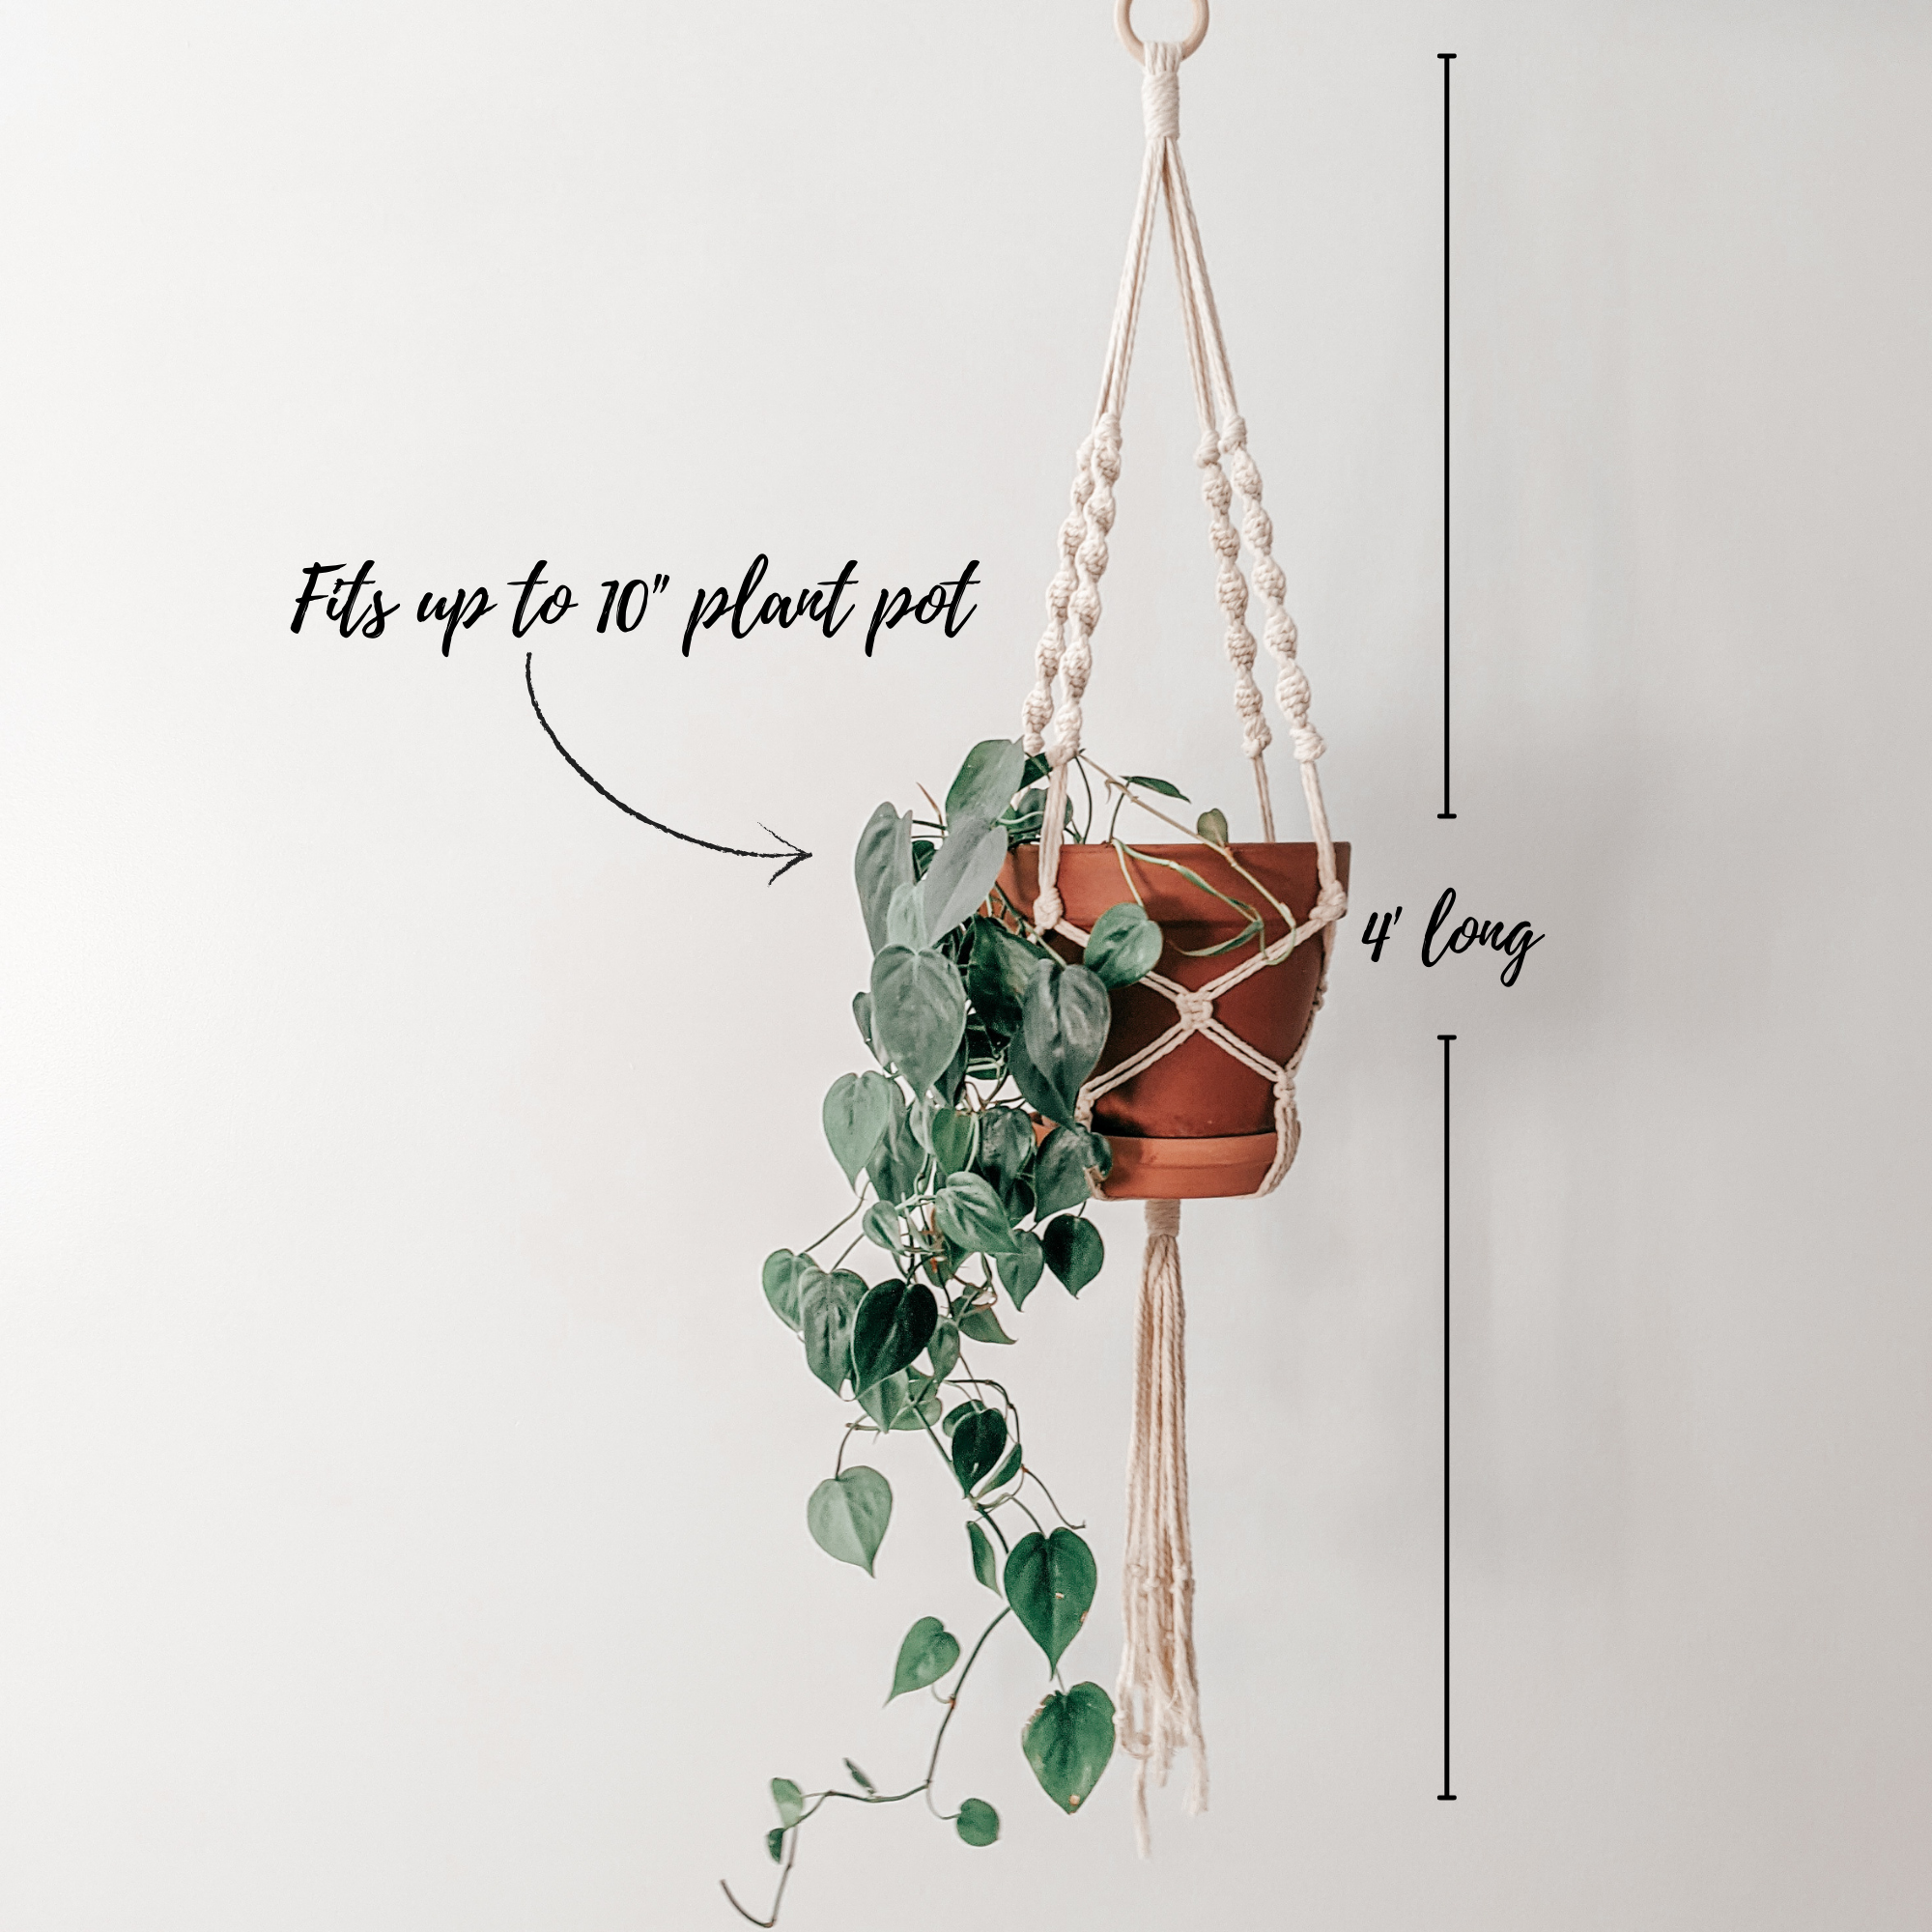 Boho Macrame DIY Plant Hanger Dimensions 4' in length fits plant pots up to 10